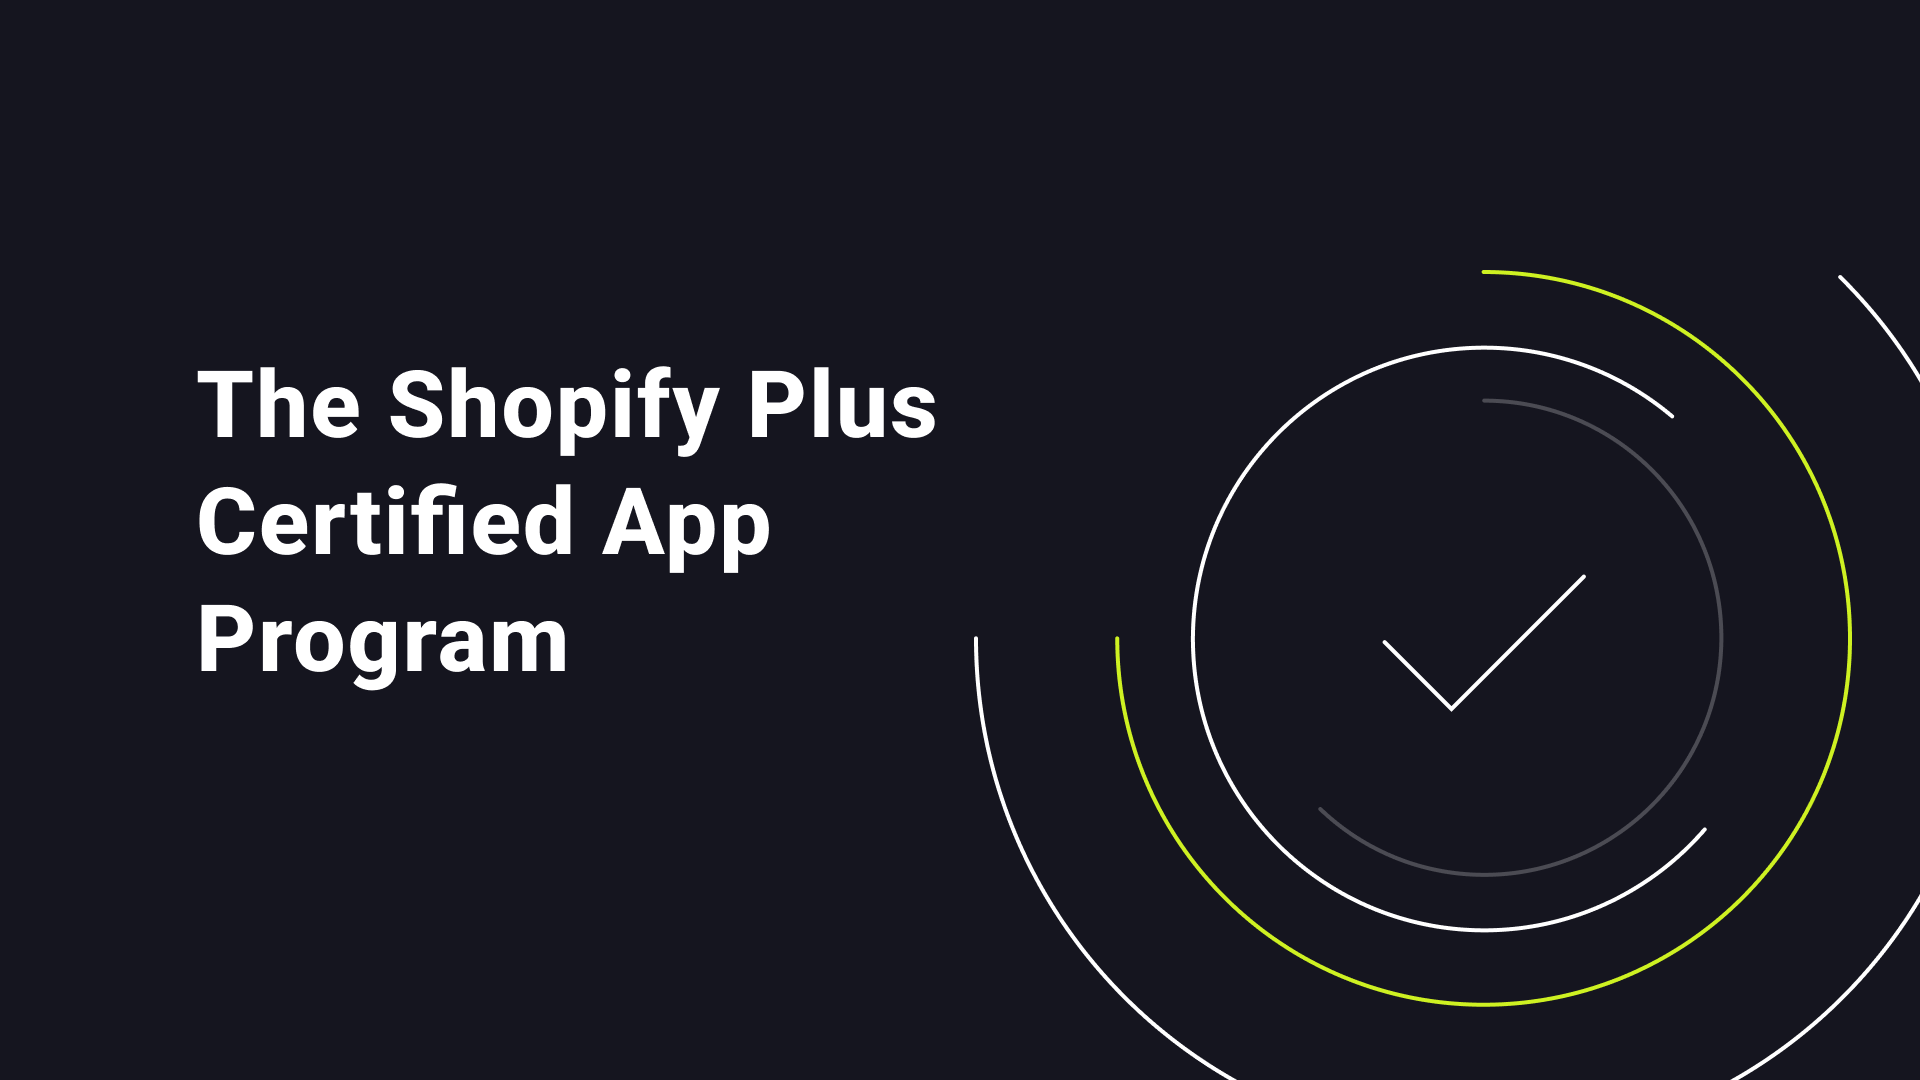 It’s Official: Fairing is now a Shopify Plus Certified App Partner!